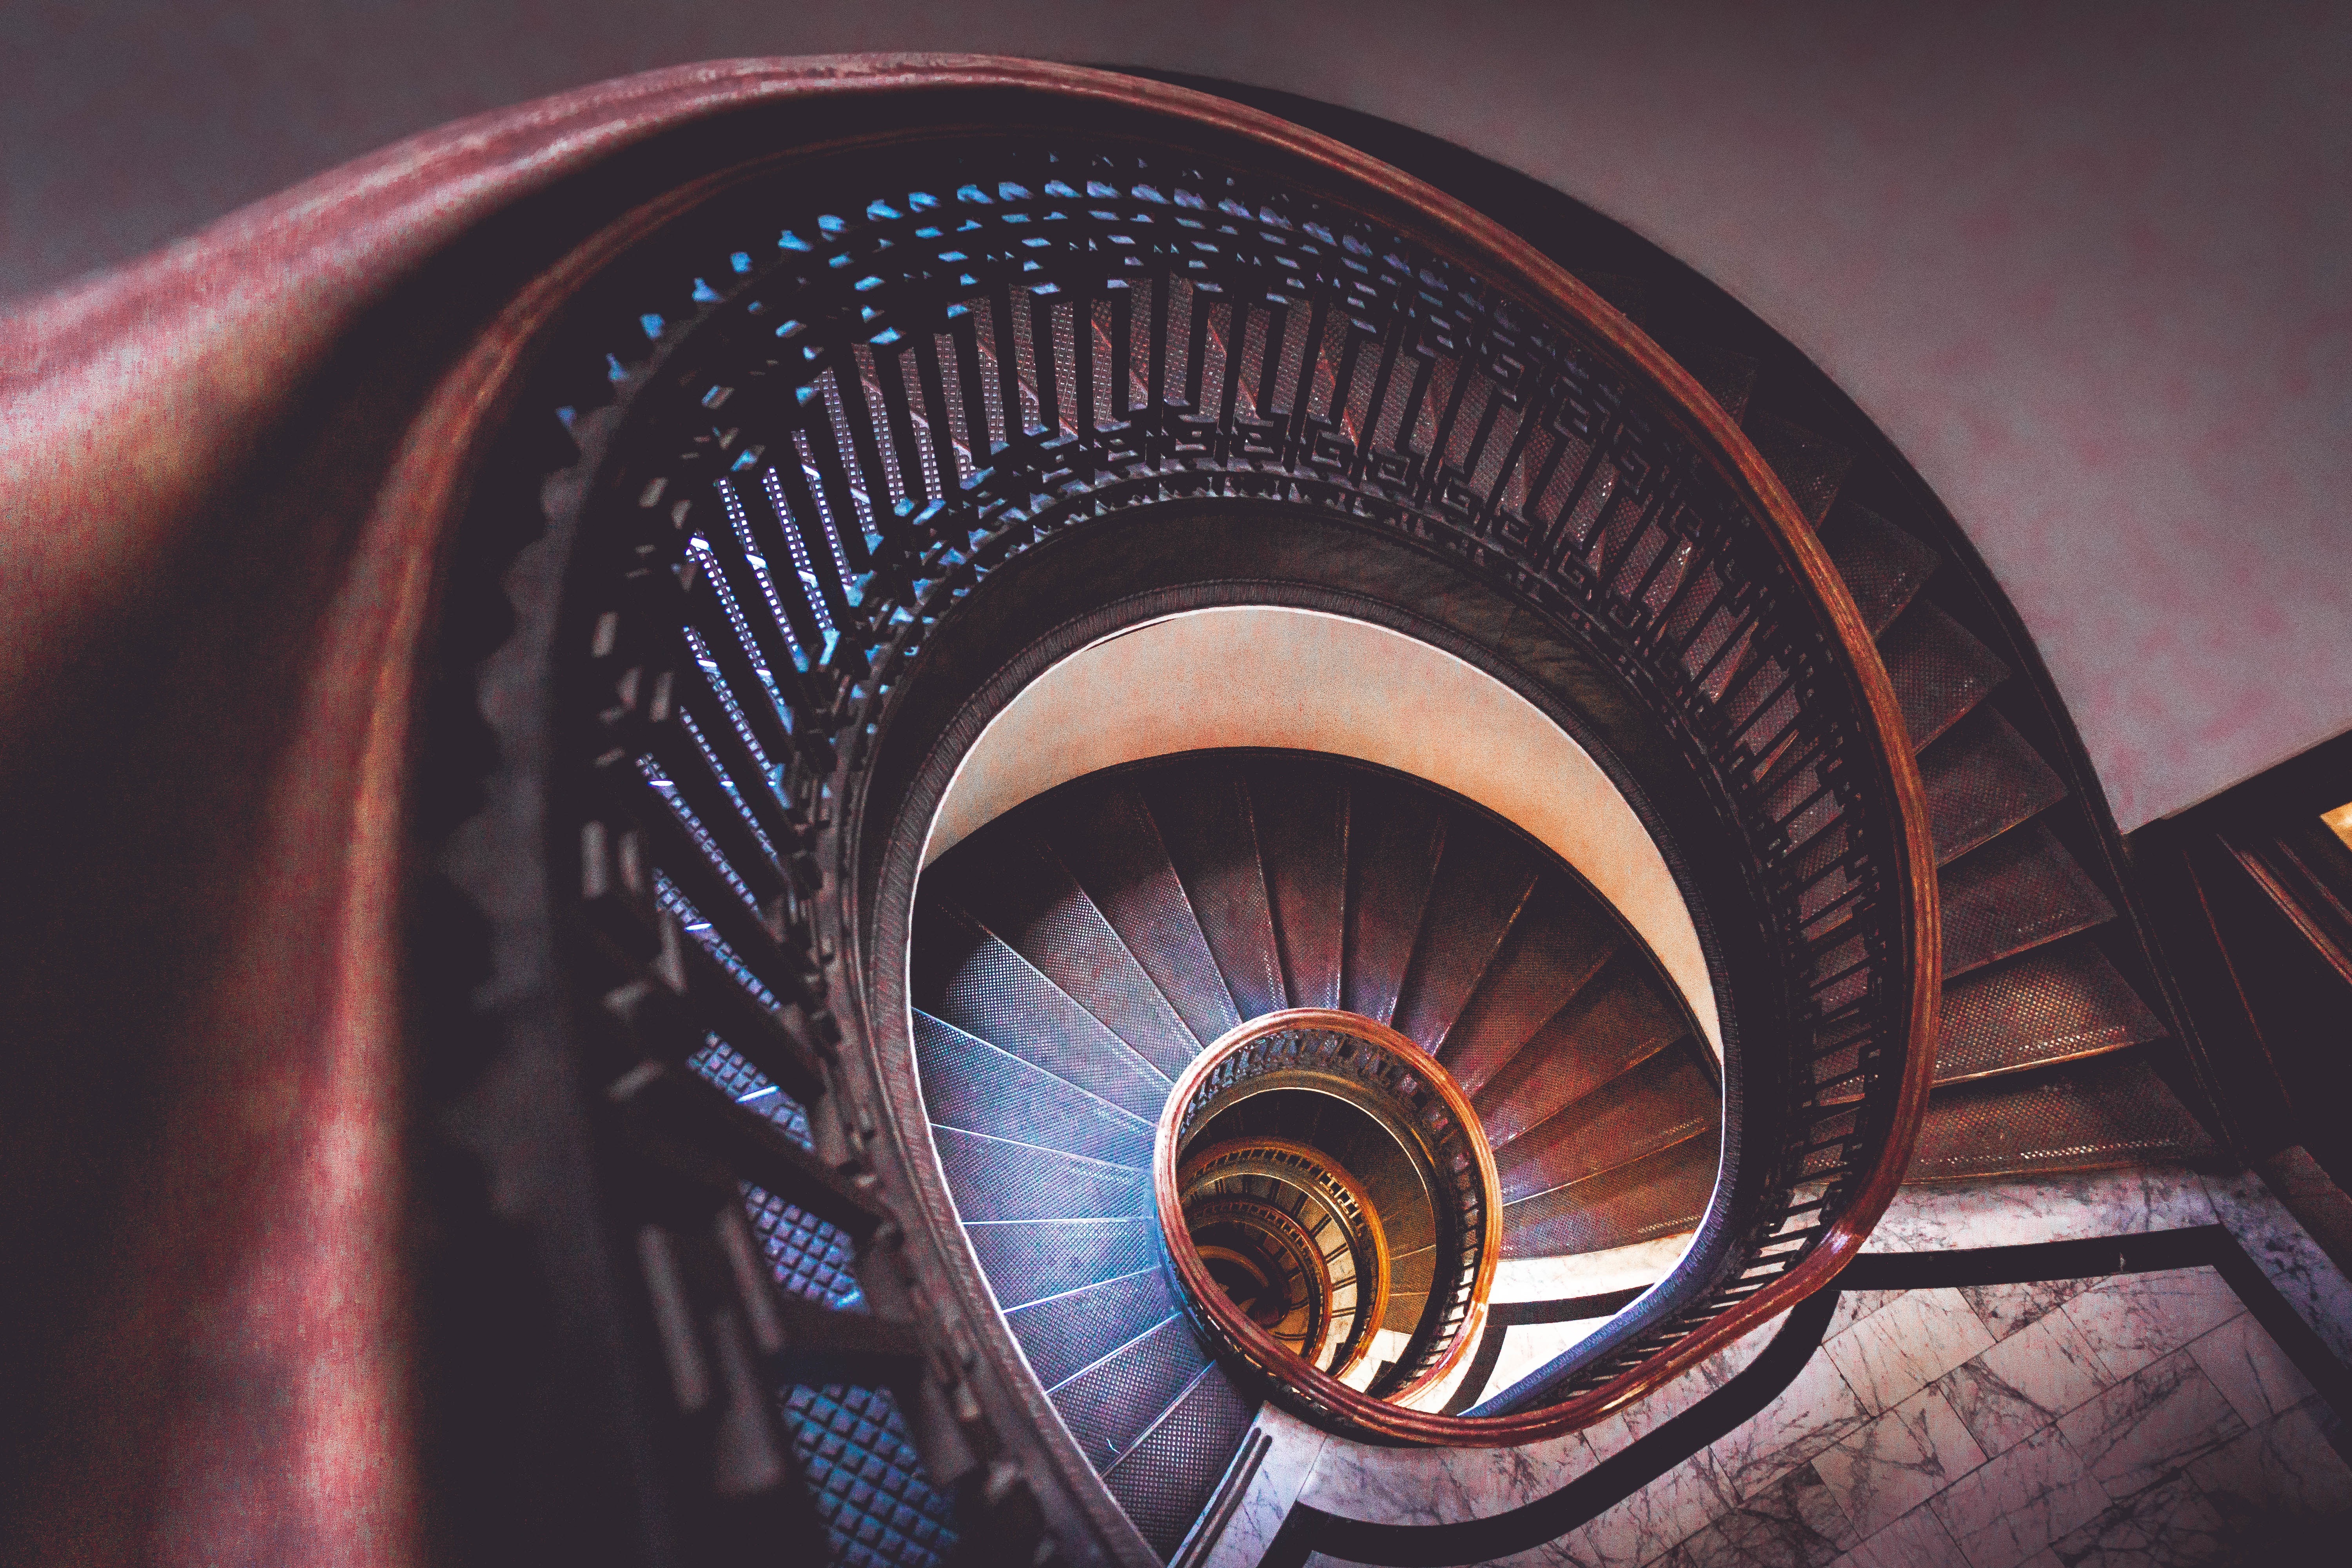 HD wallpaper miscellanea, miscellaneous, stairs, ladder, premises, room, spiral